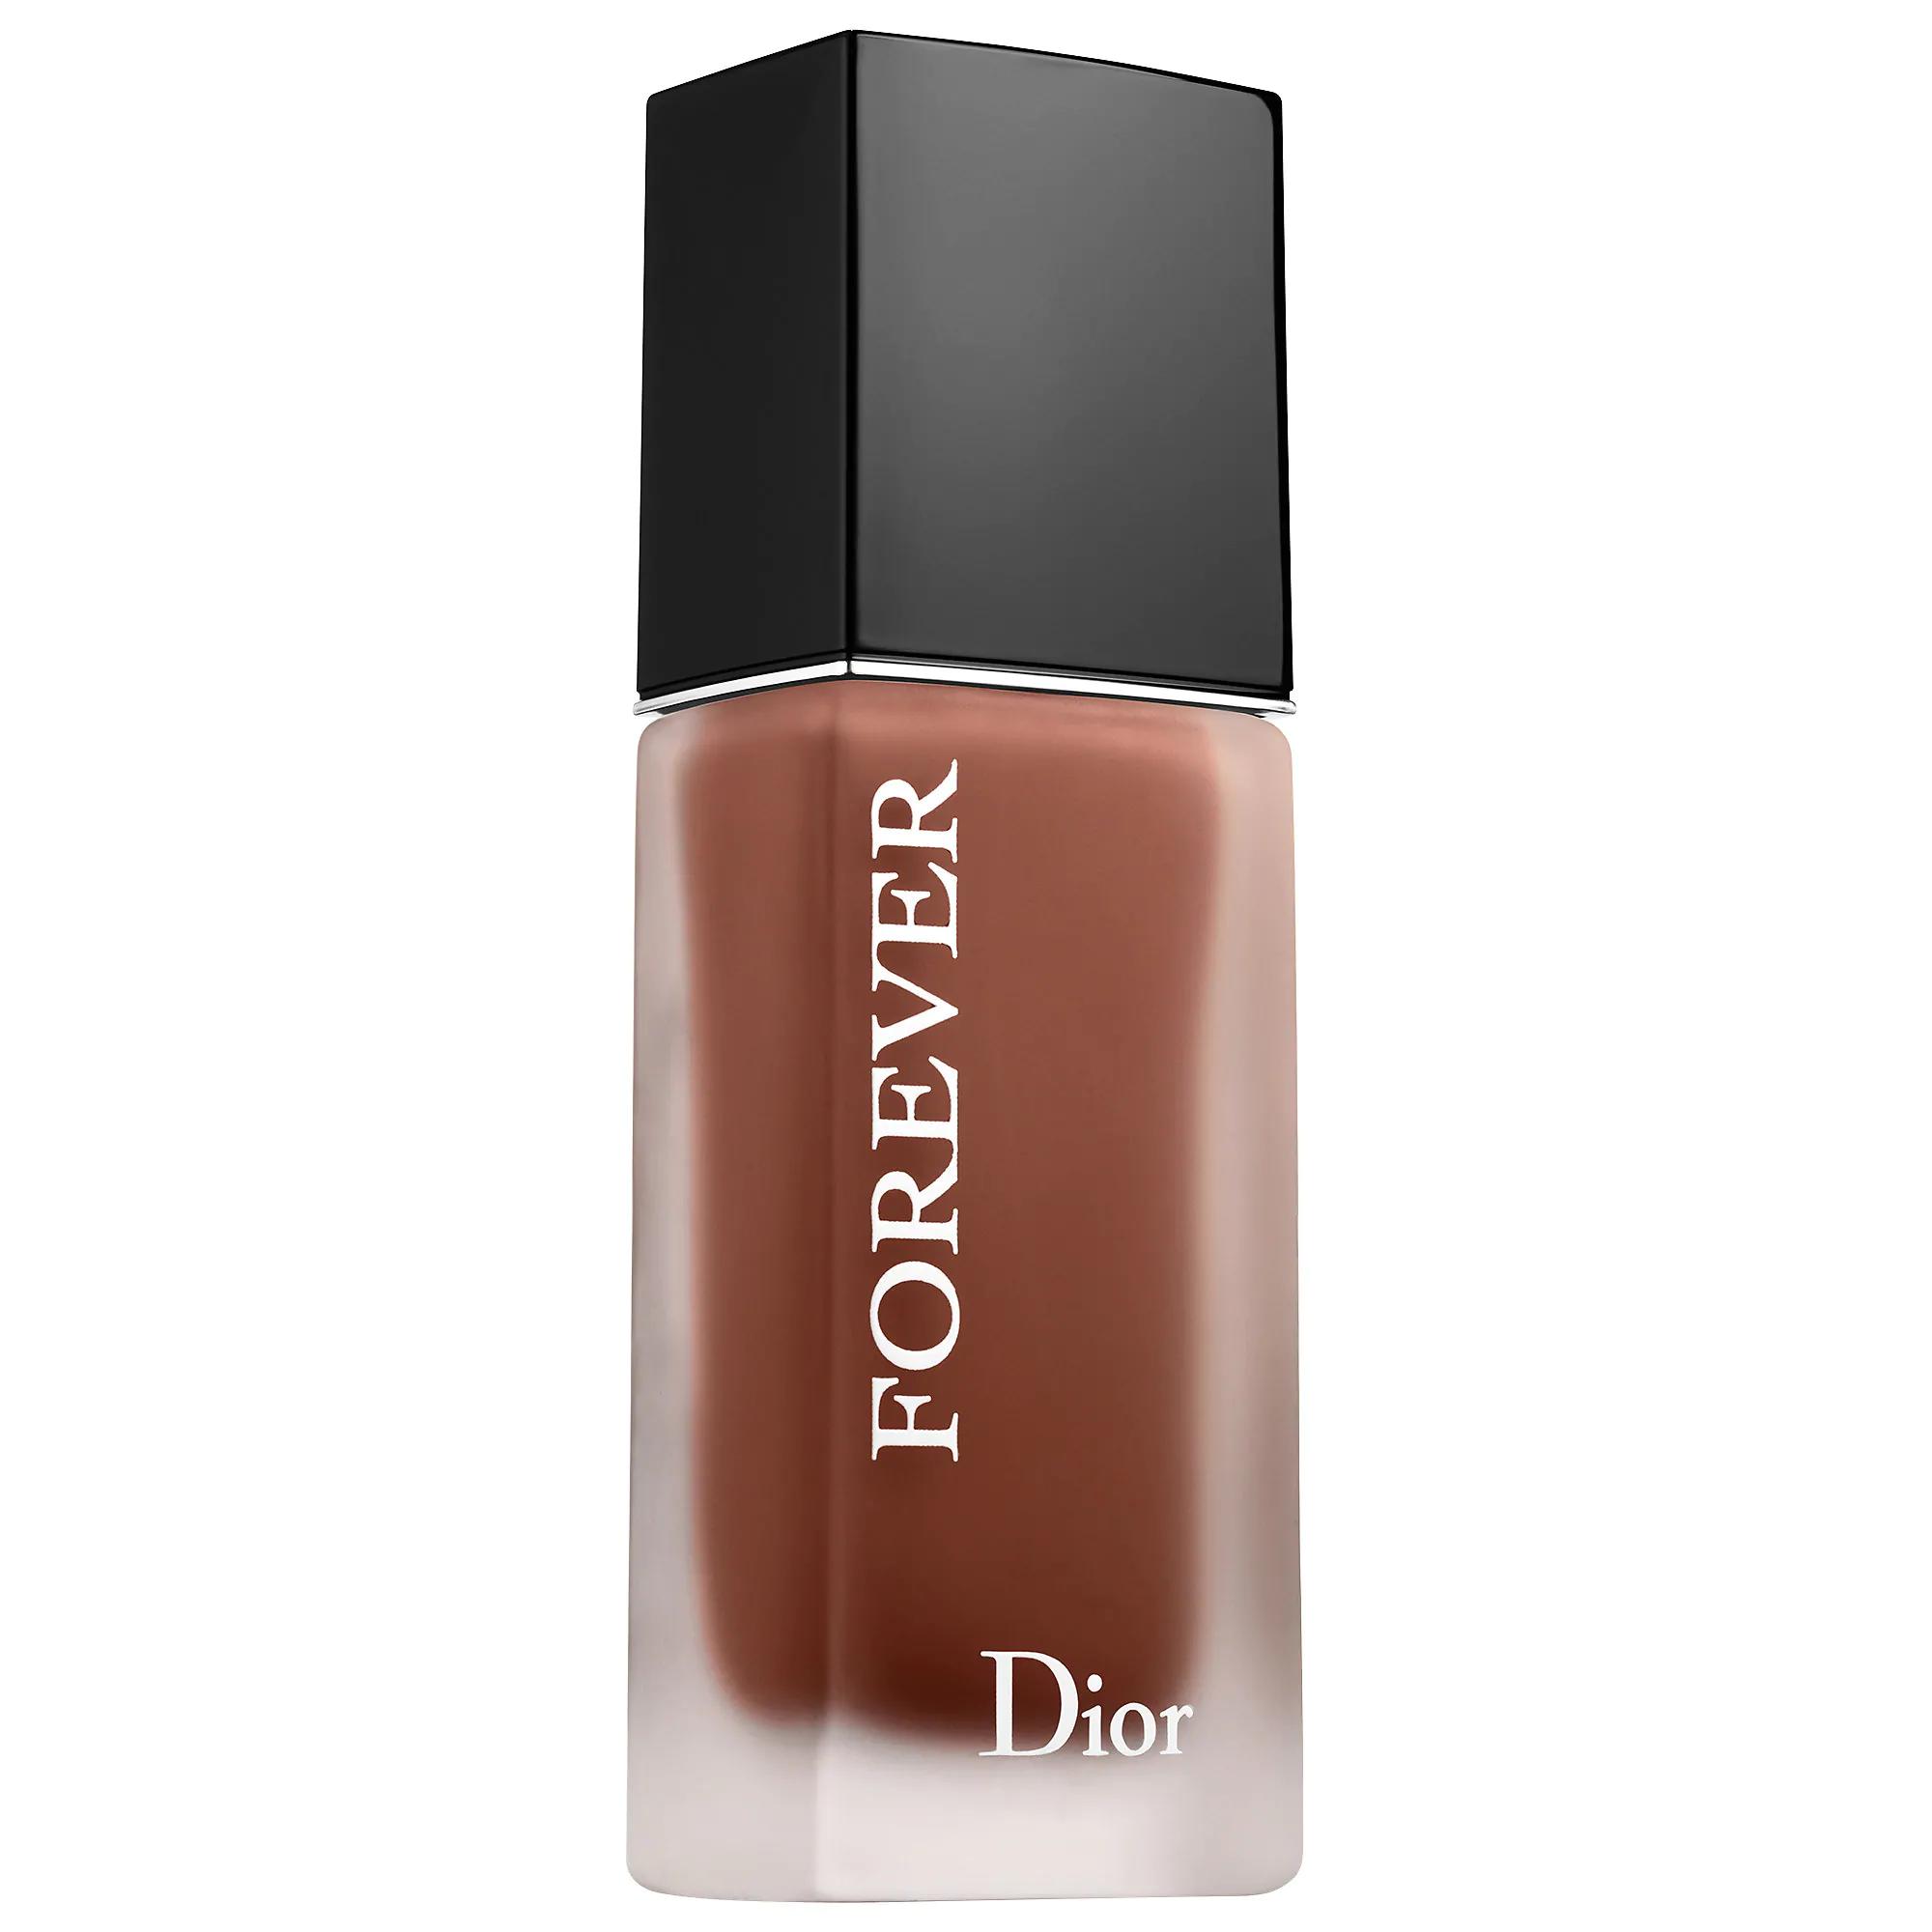 Dior Forever 24h Wear High Perfection Foundation 7.5N